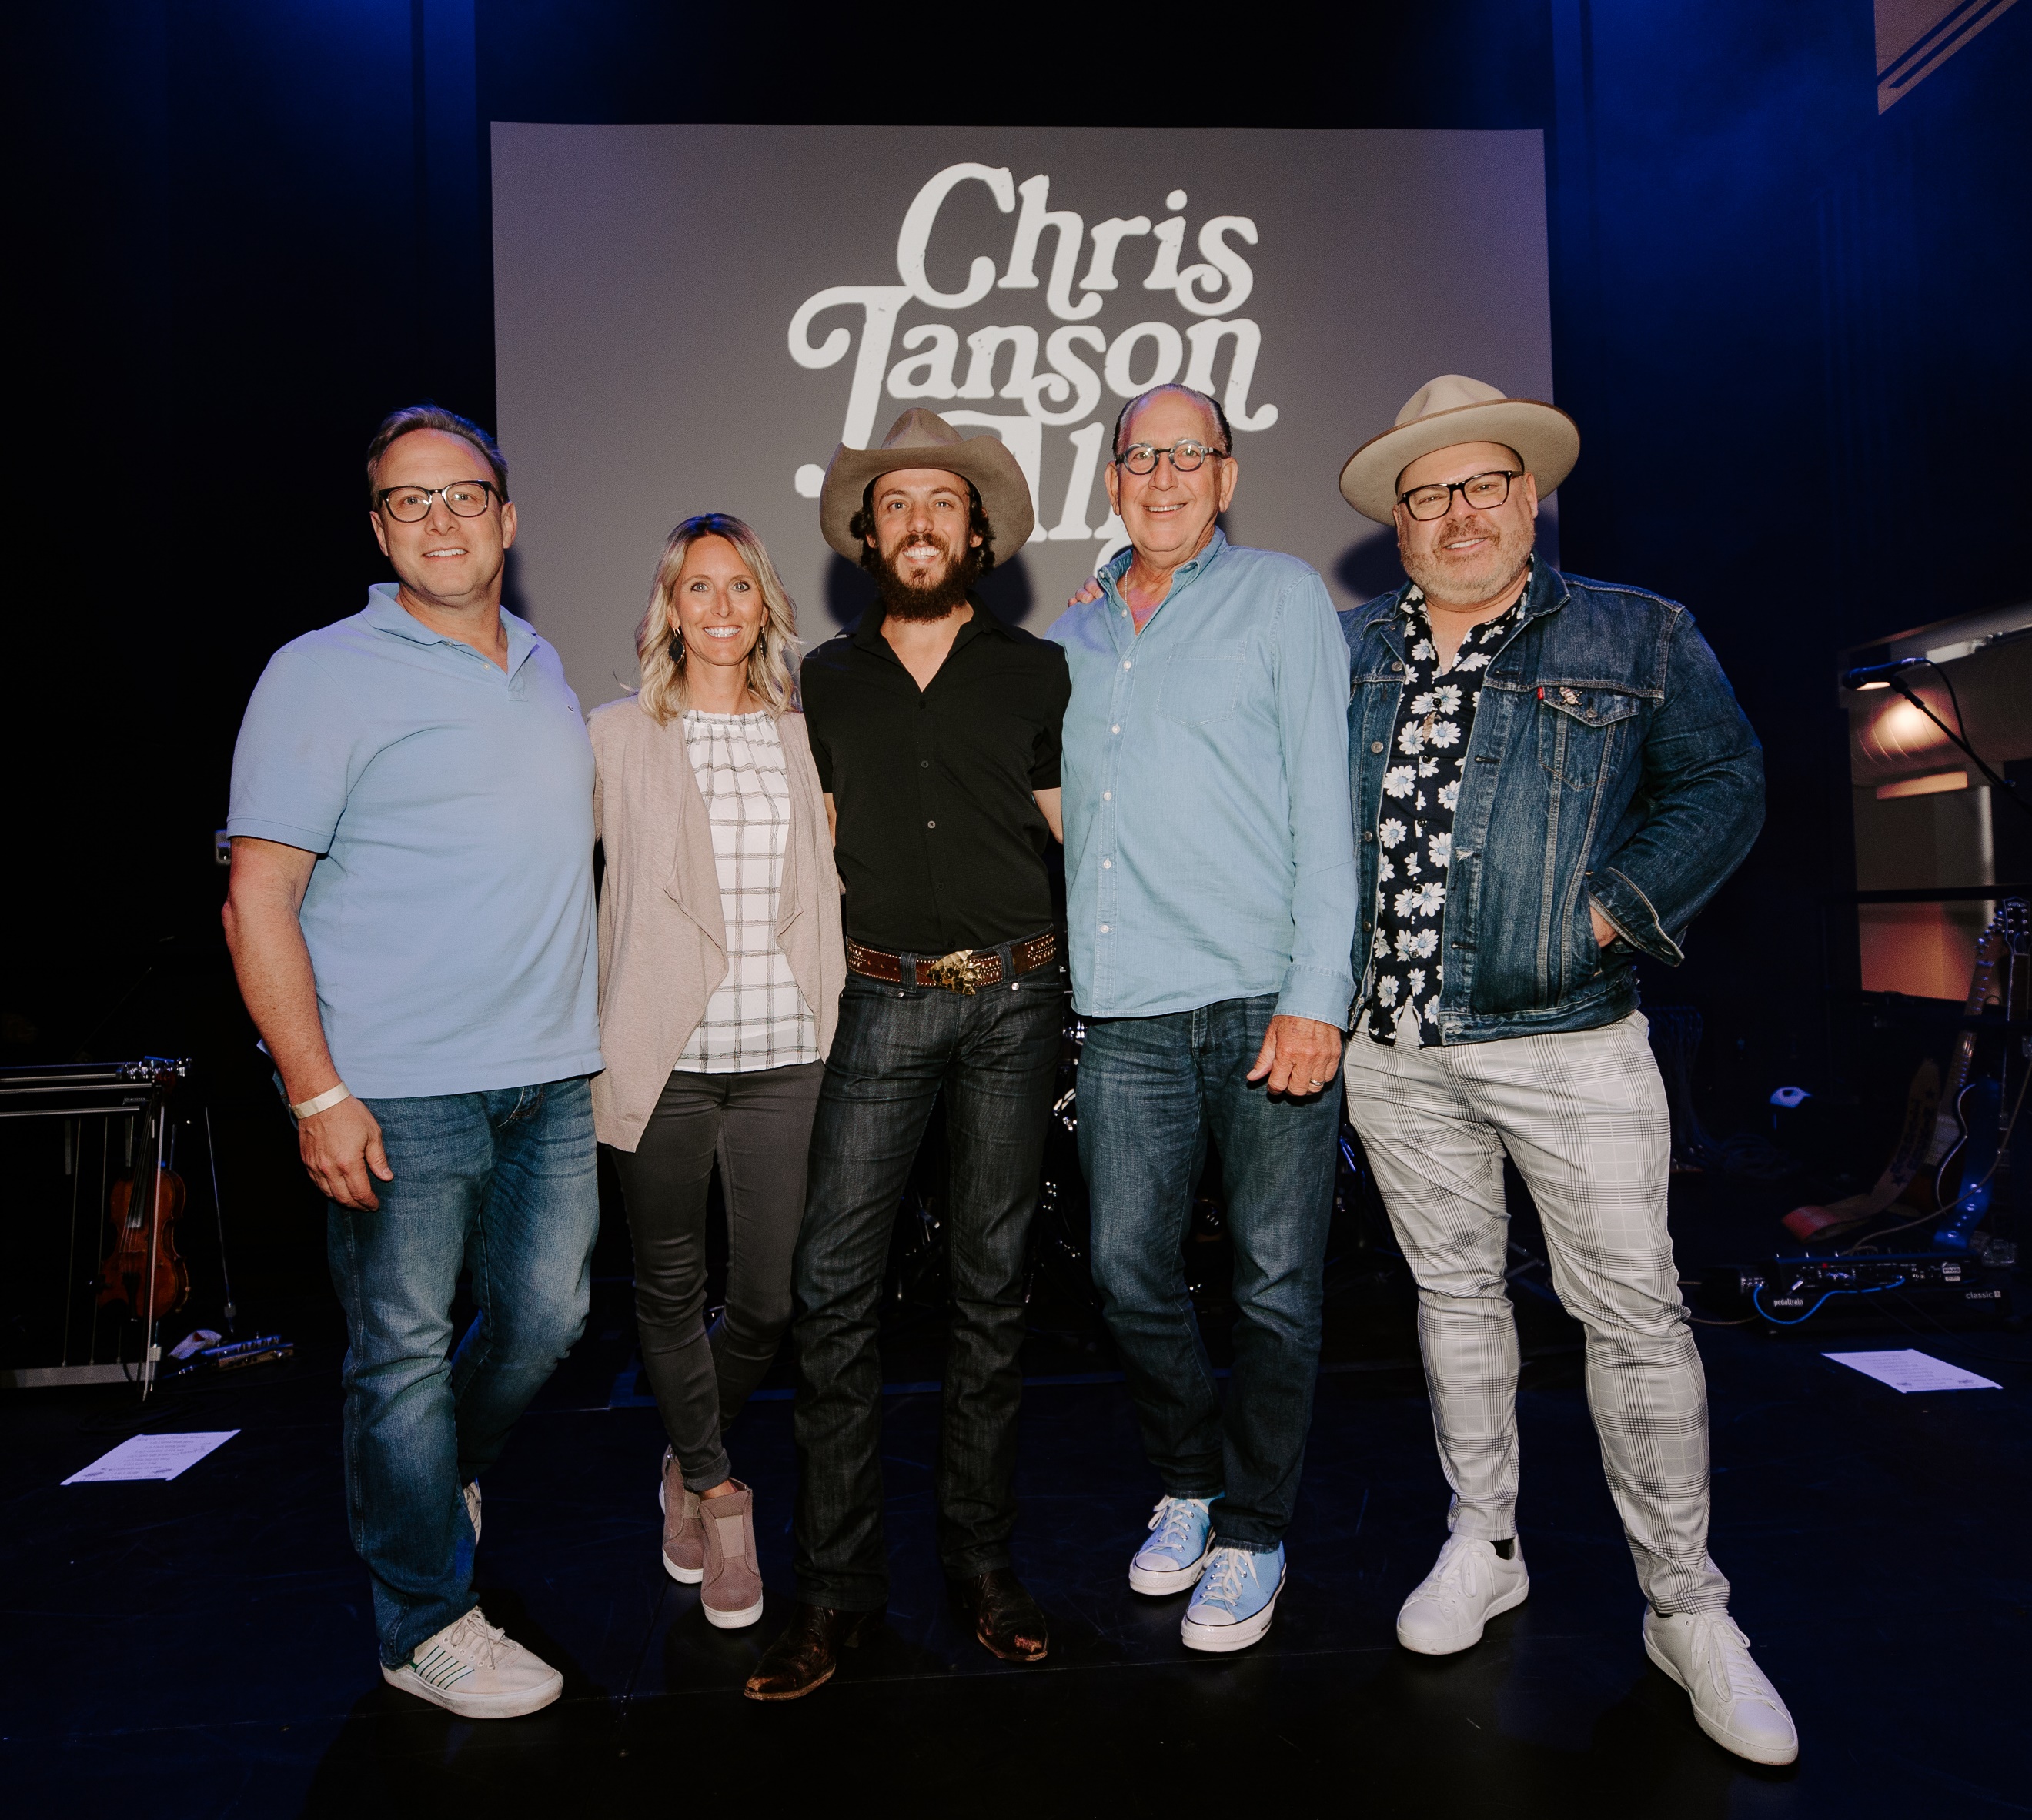 CHRIS JANSON TO PERFORM ON NBC’S 3RD HOUR OF TODAY ON THURSDAY, APRIL 28